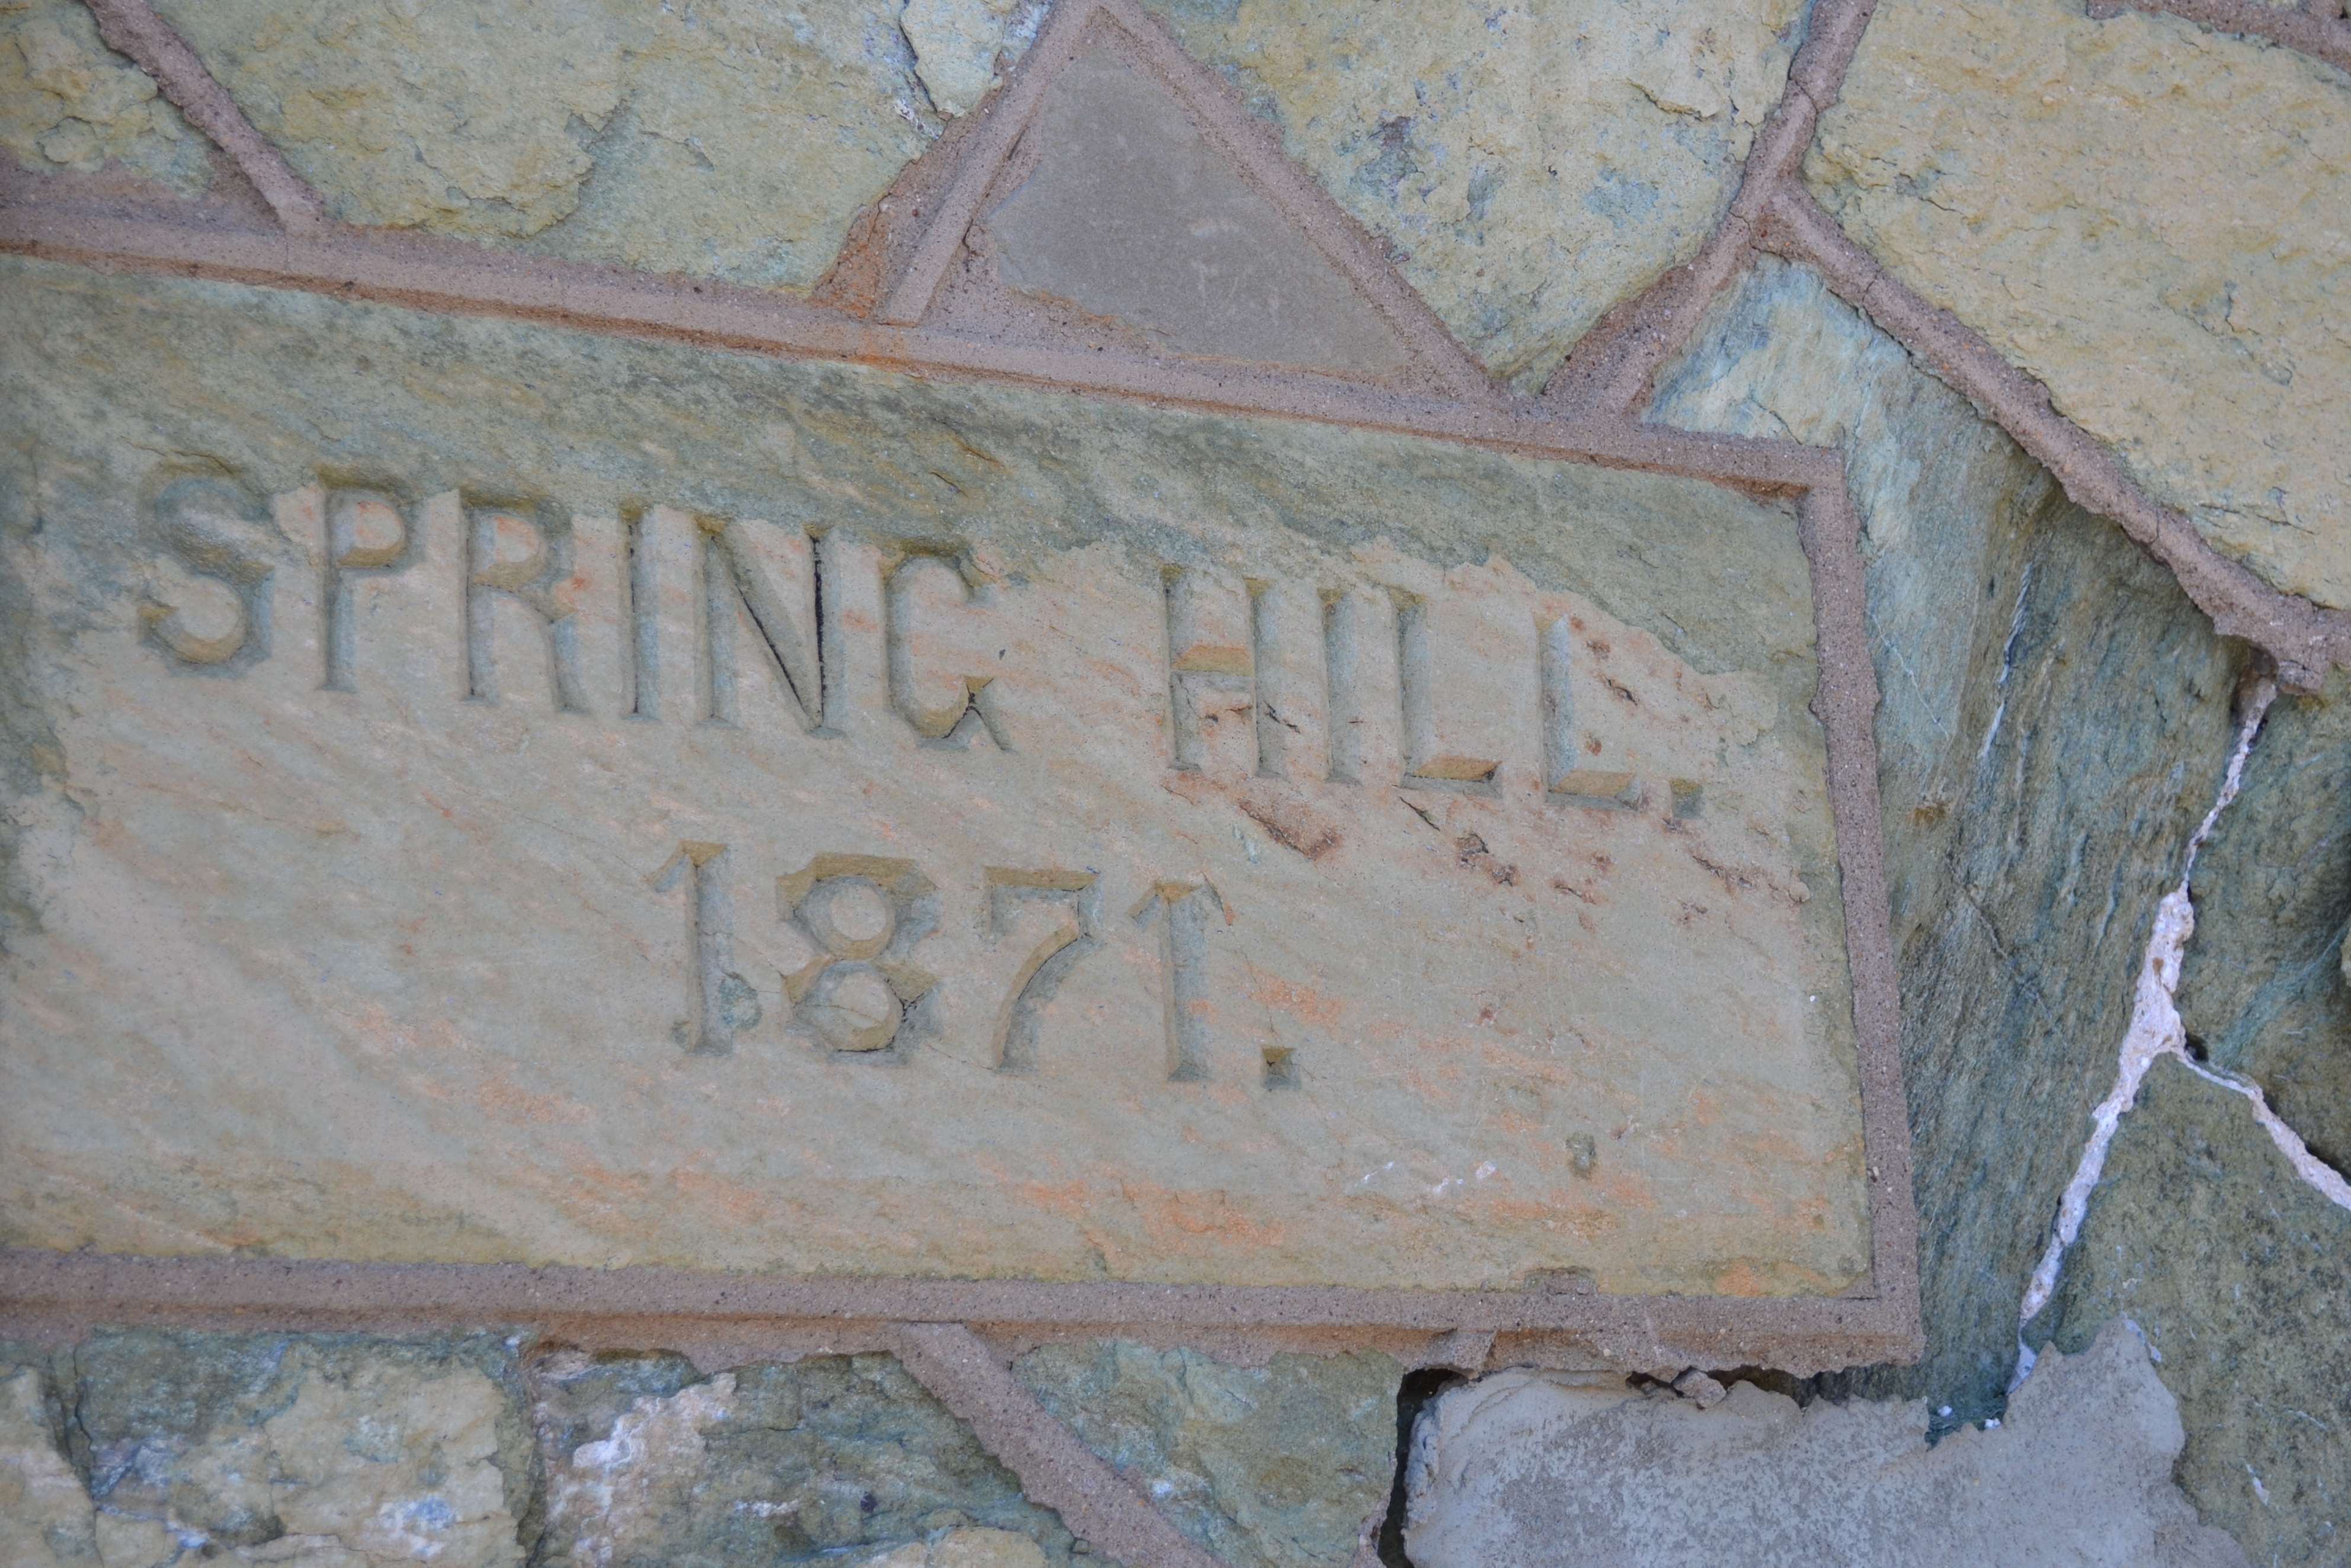 The station dates back to 1871 when it was known as Spring Hill Station